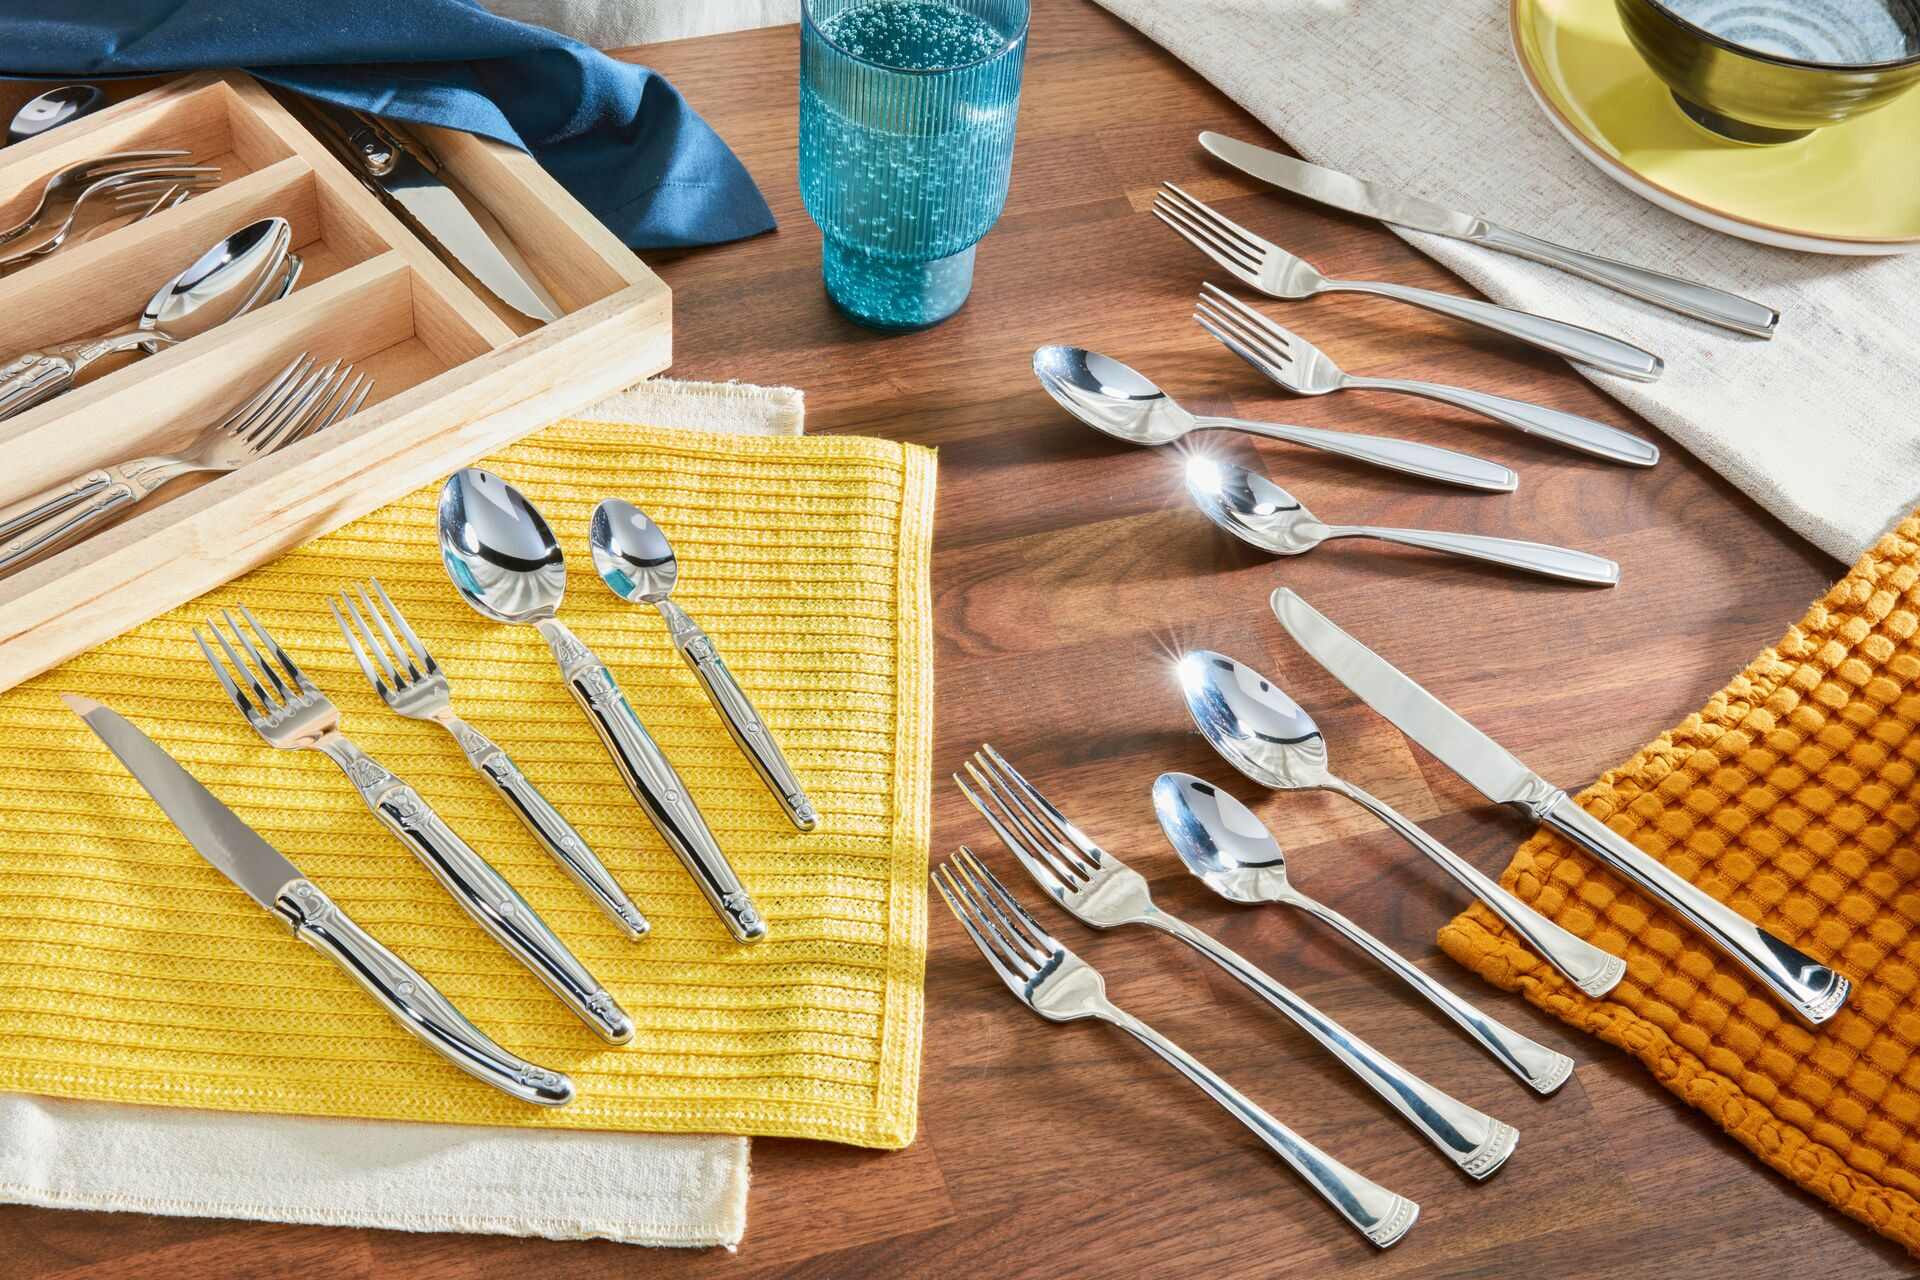 Classification Of Forks, Spoons, And Knives In Tableware